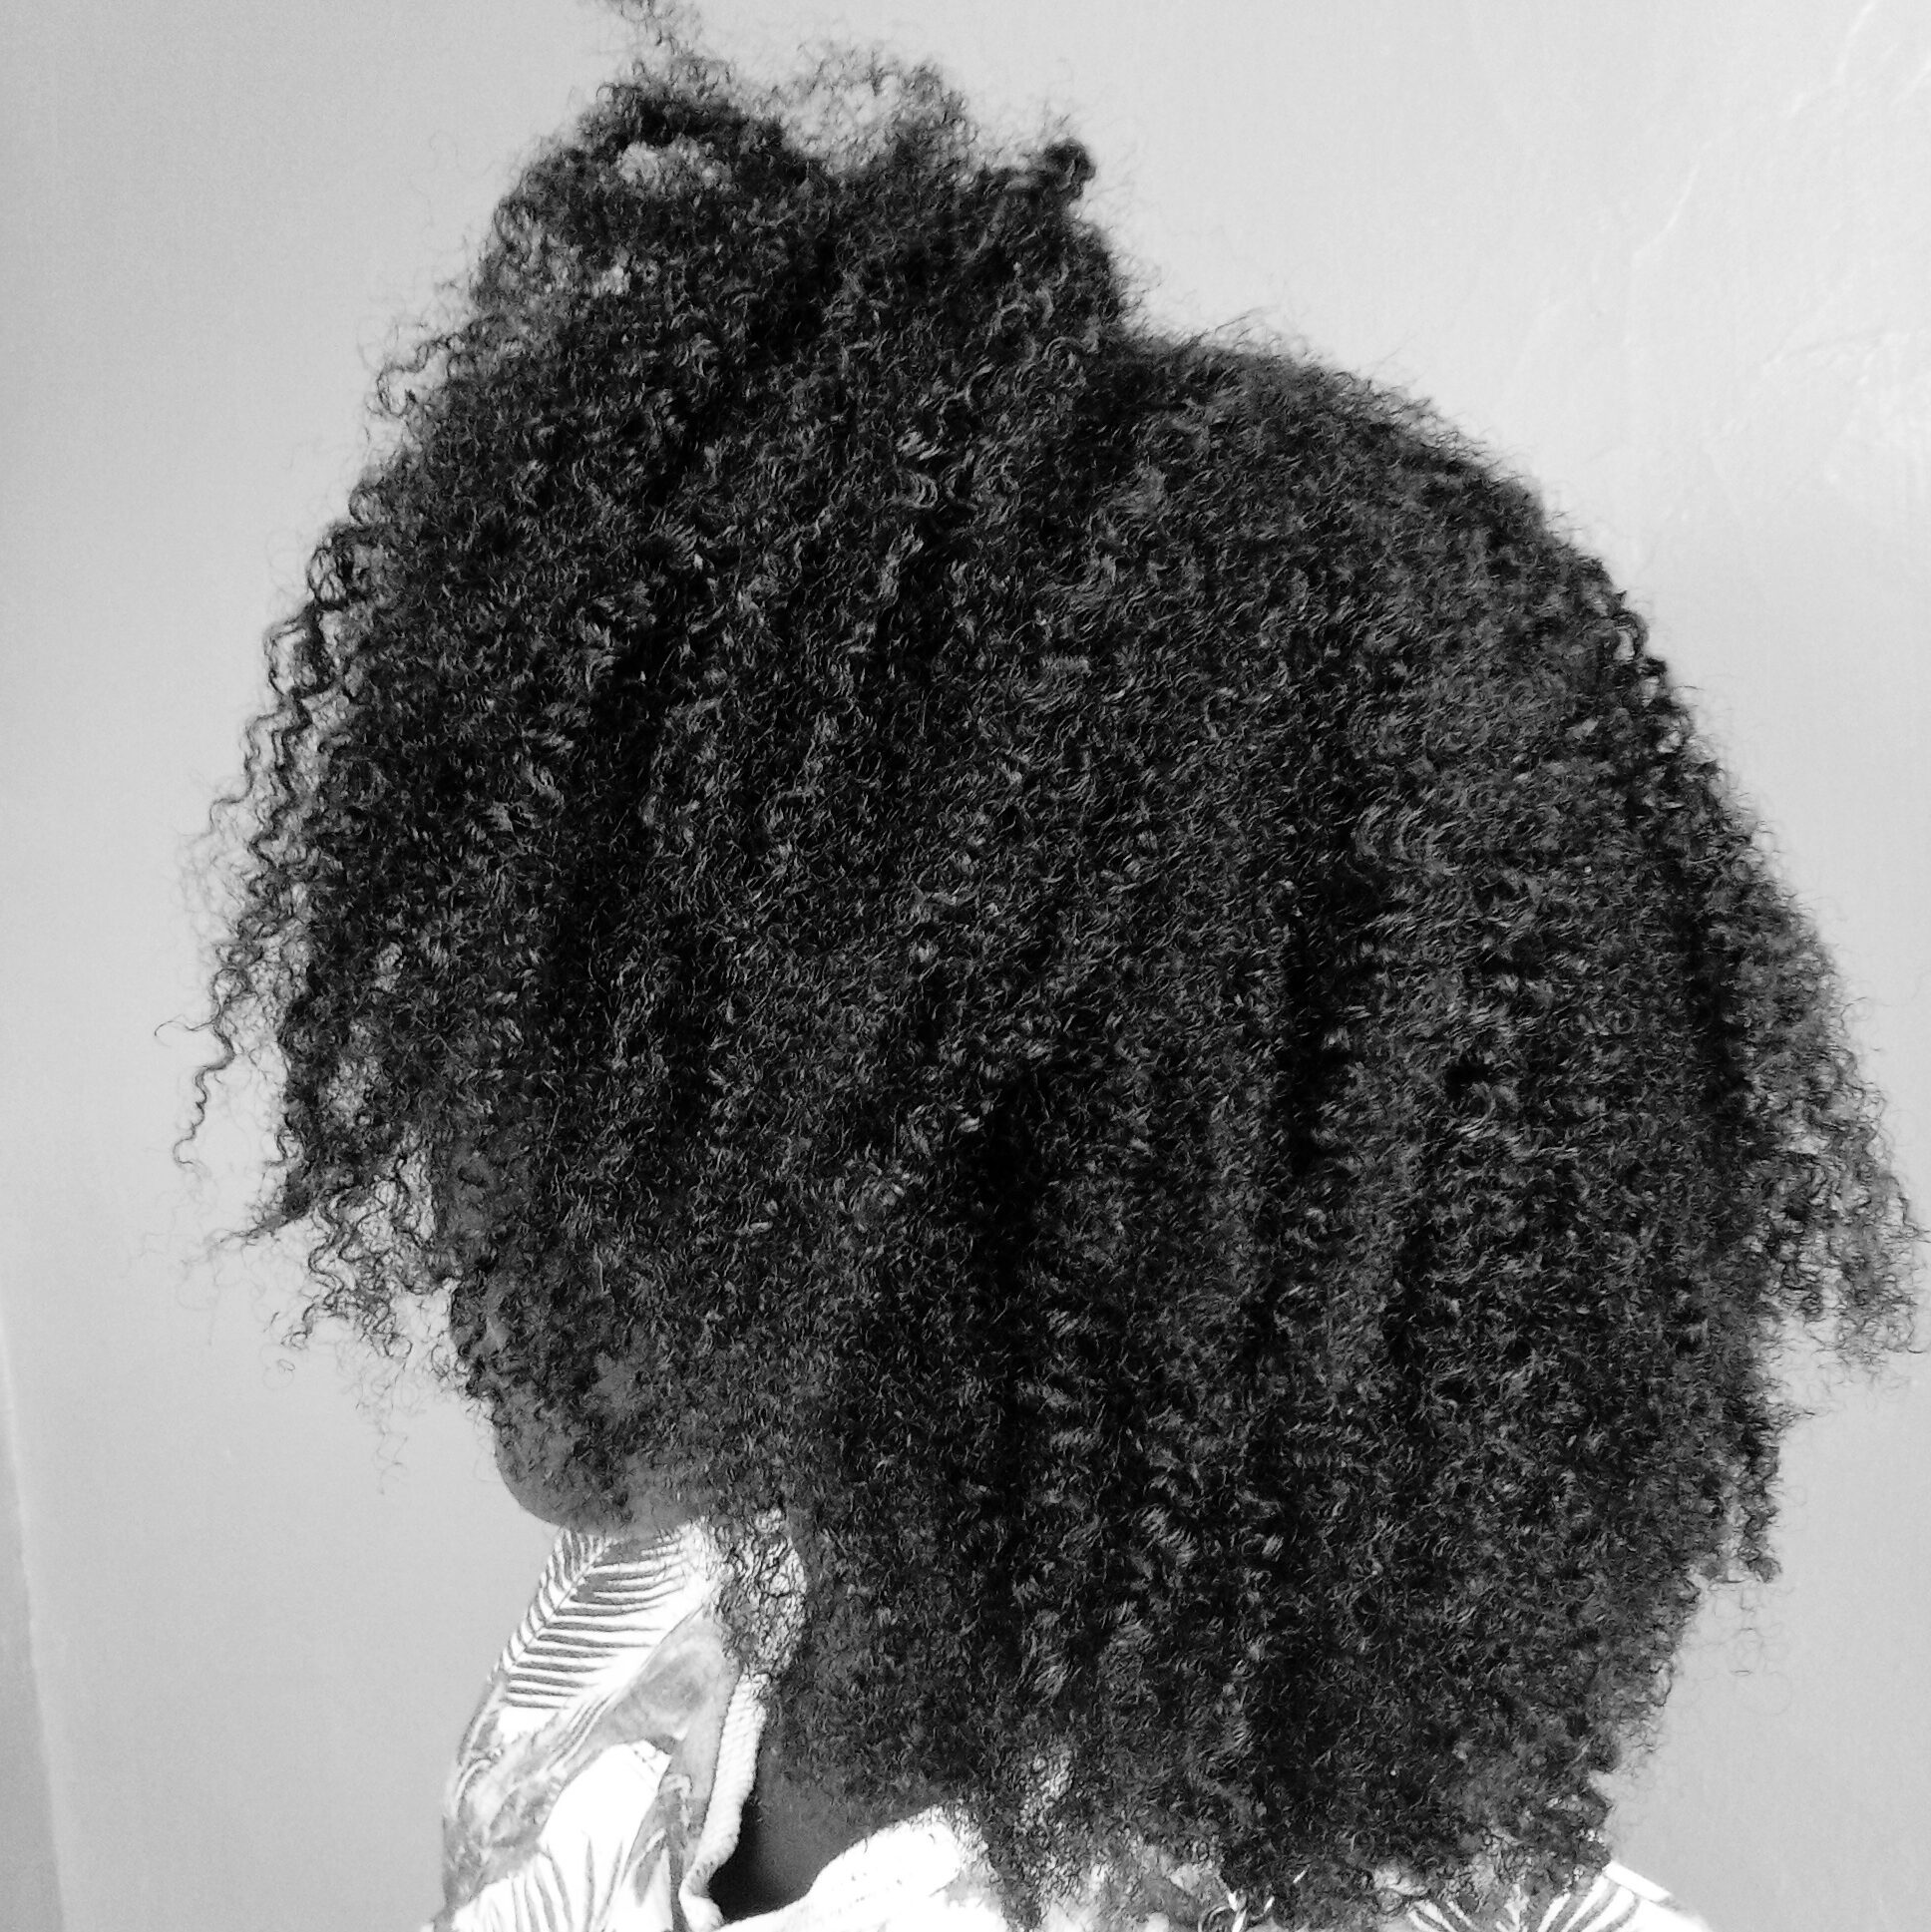 How care for my Natural Hair at home and grow it naturally